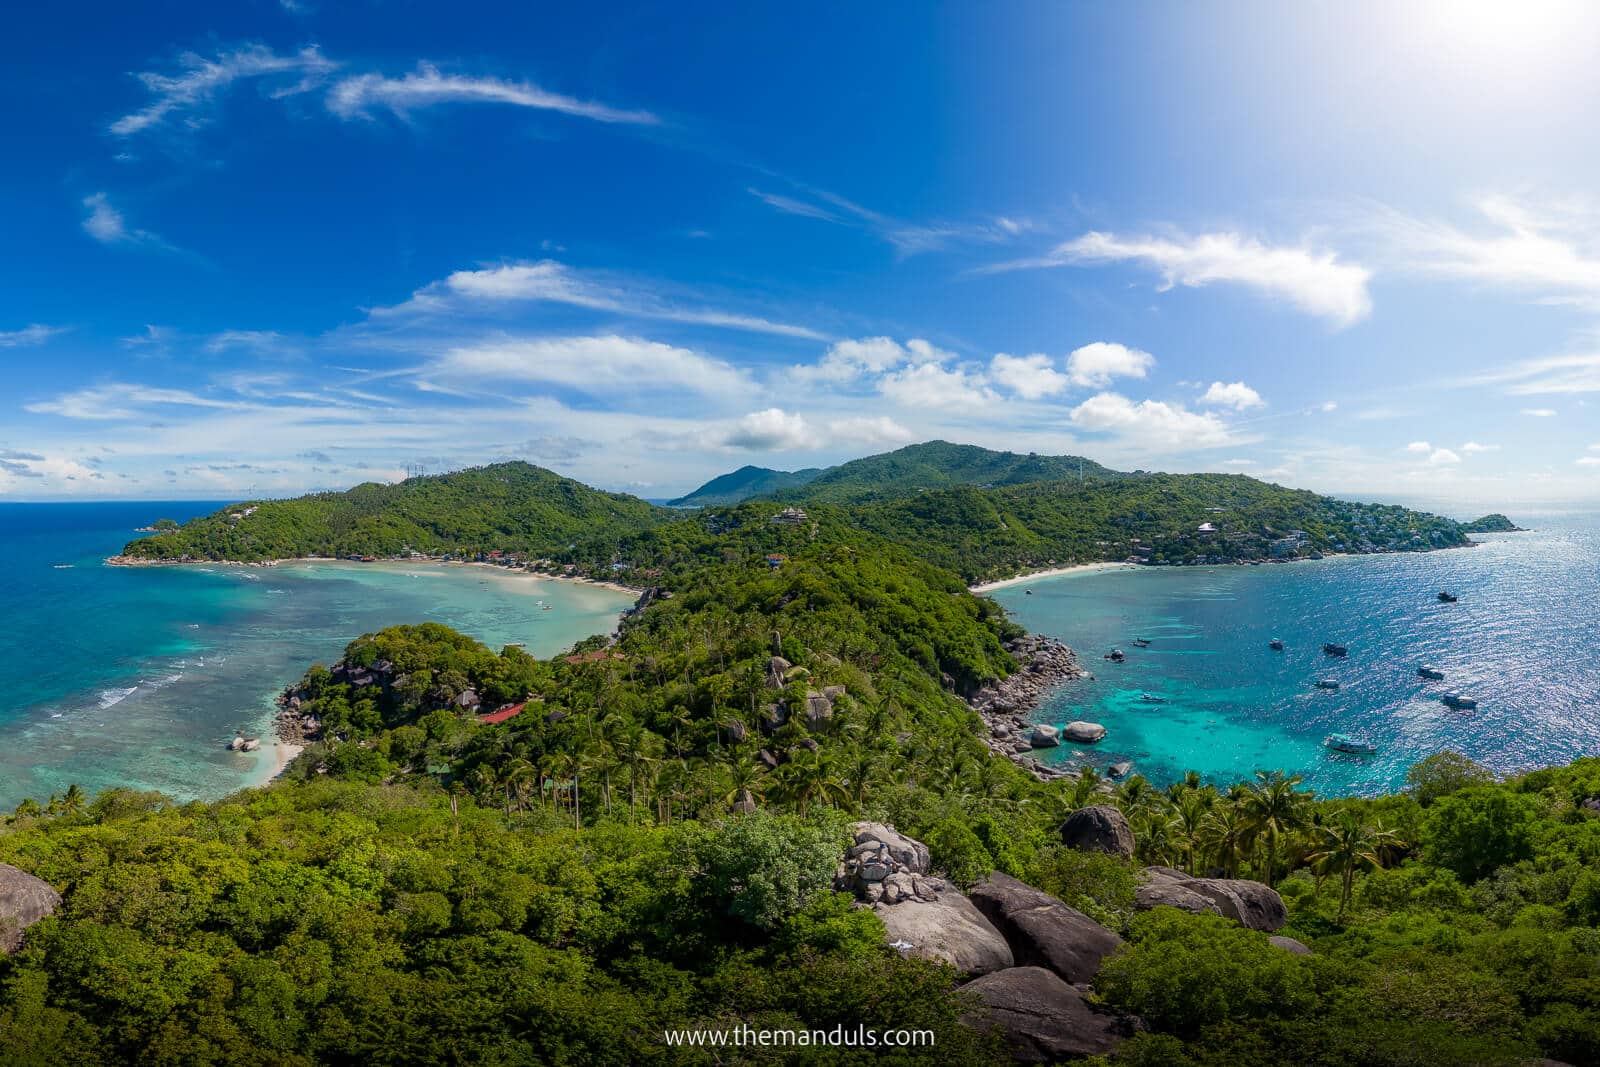 john suwan viewpoint, best things to do on Koh Tao, BEst places Koh Tao, attractions, snorkeling Koh Tao, Koh Tao Best Beaches, Koh Tao Itinerary